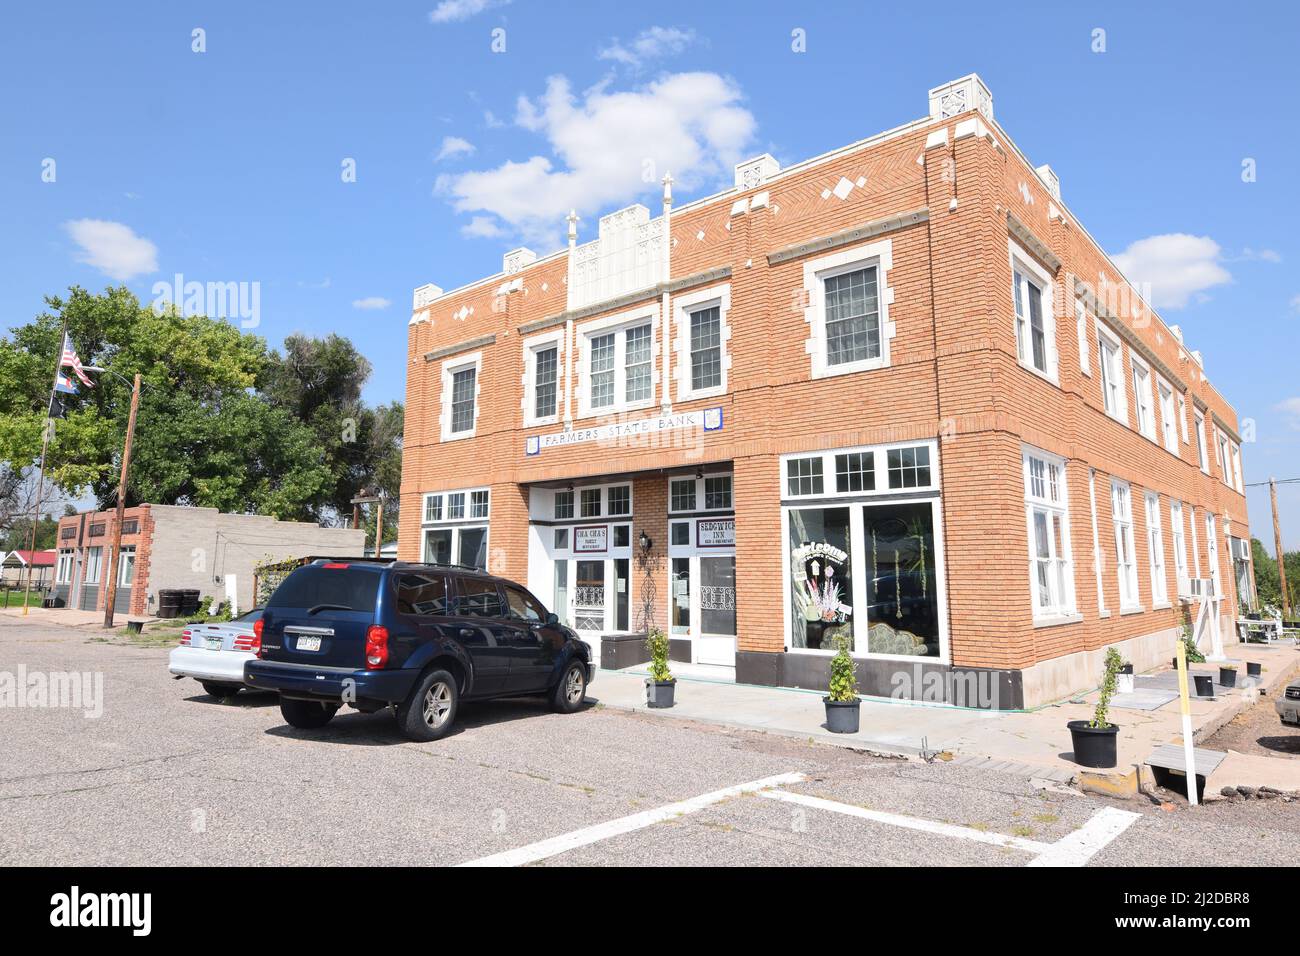 Farmers State Bank building in Sedgwick Colorado - August 2021 Stock Photo